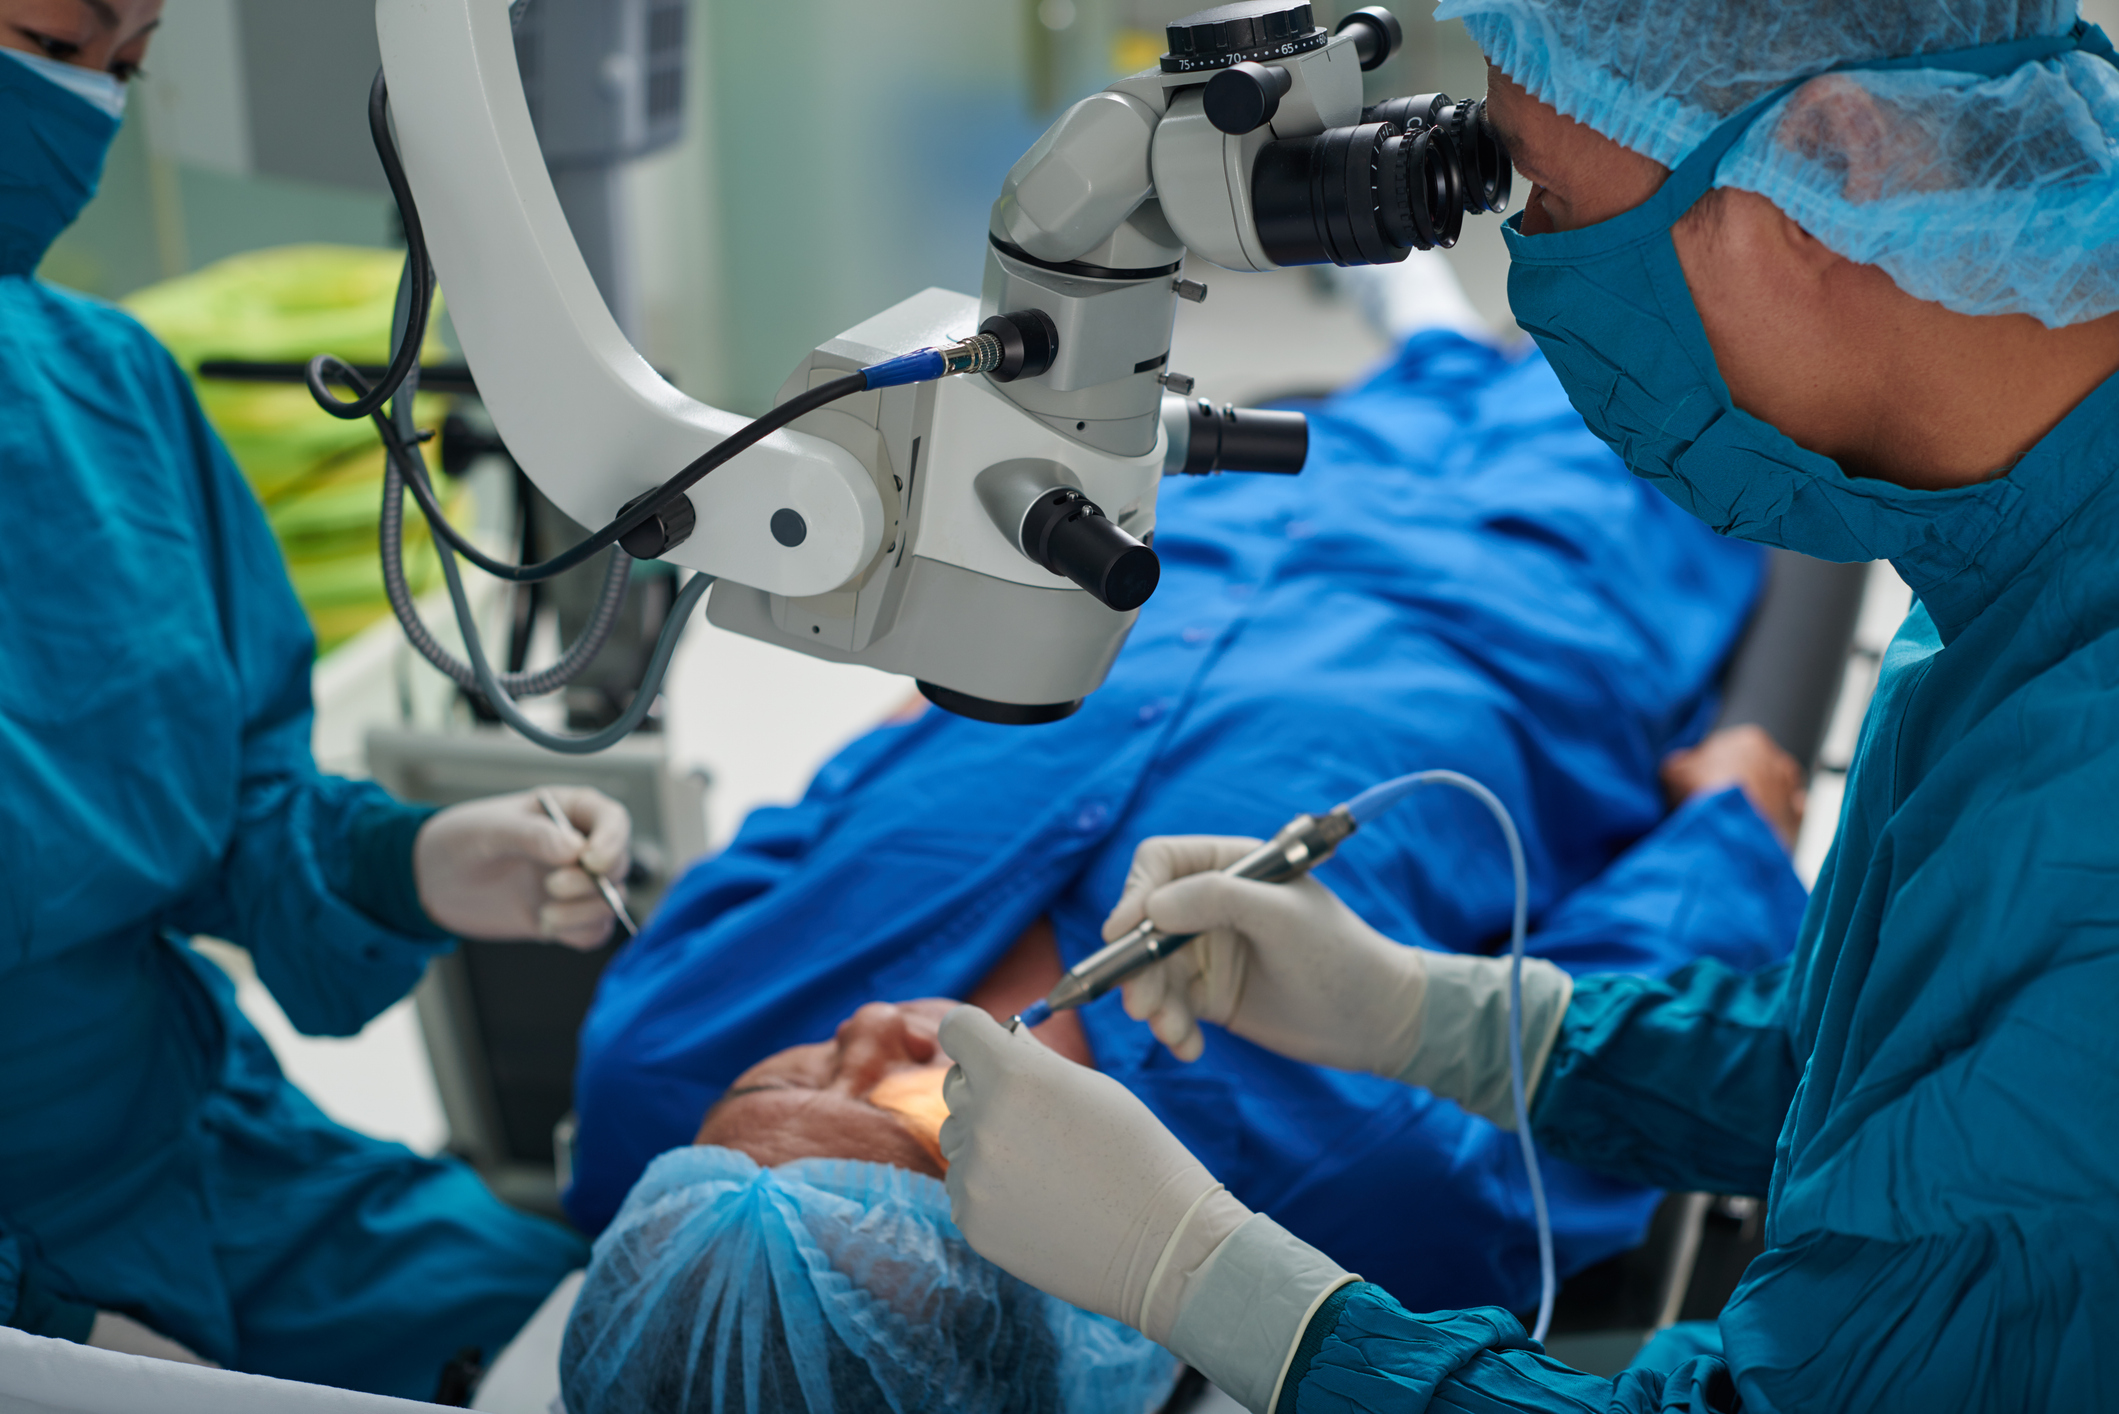 Two doctors, a white man and an Asian woman wearing blue scrubs and surgical masks, perform eye surgery on an out-of-focus patient laying on an operating table.